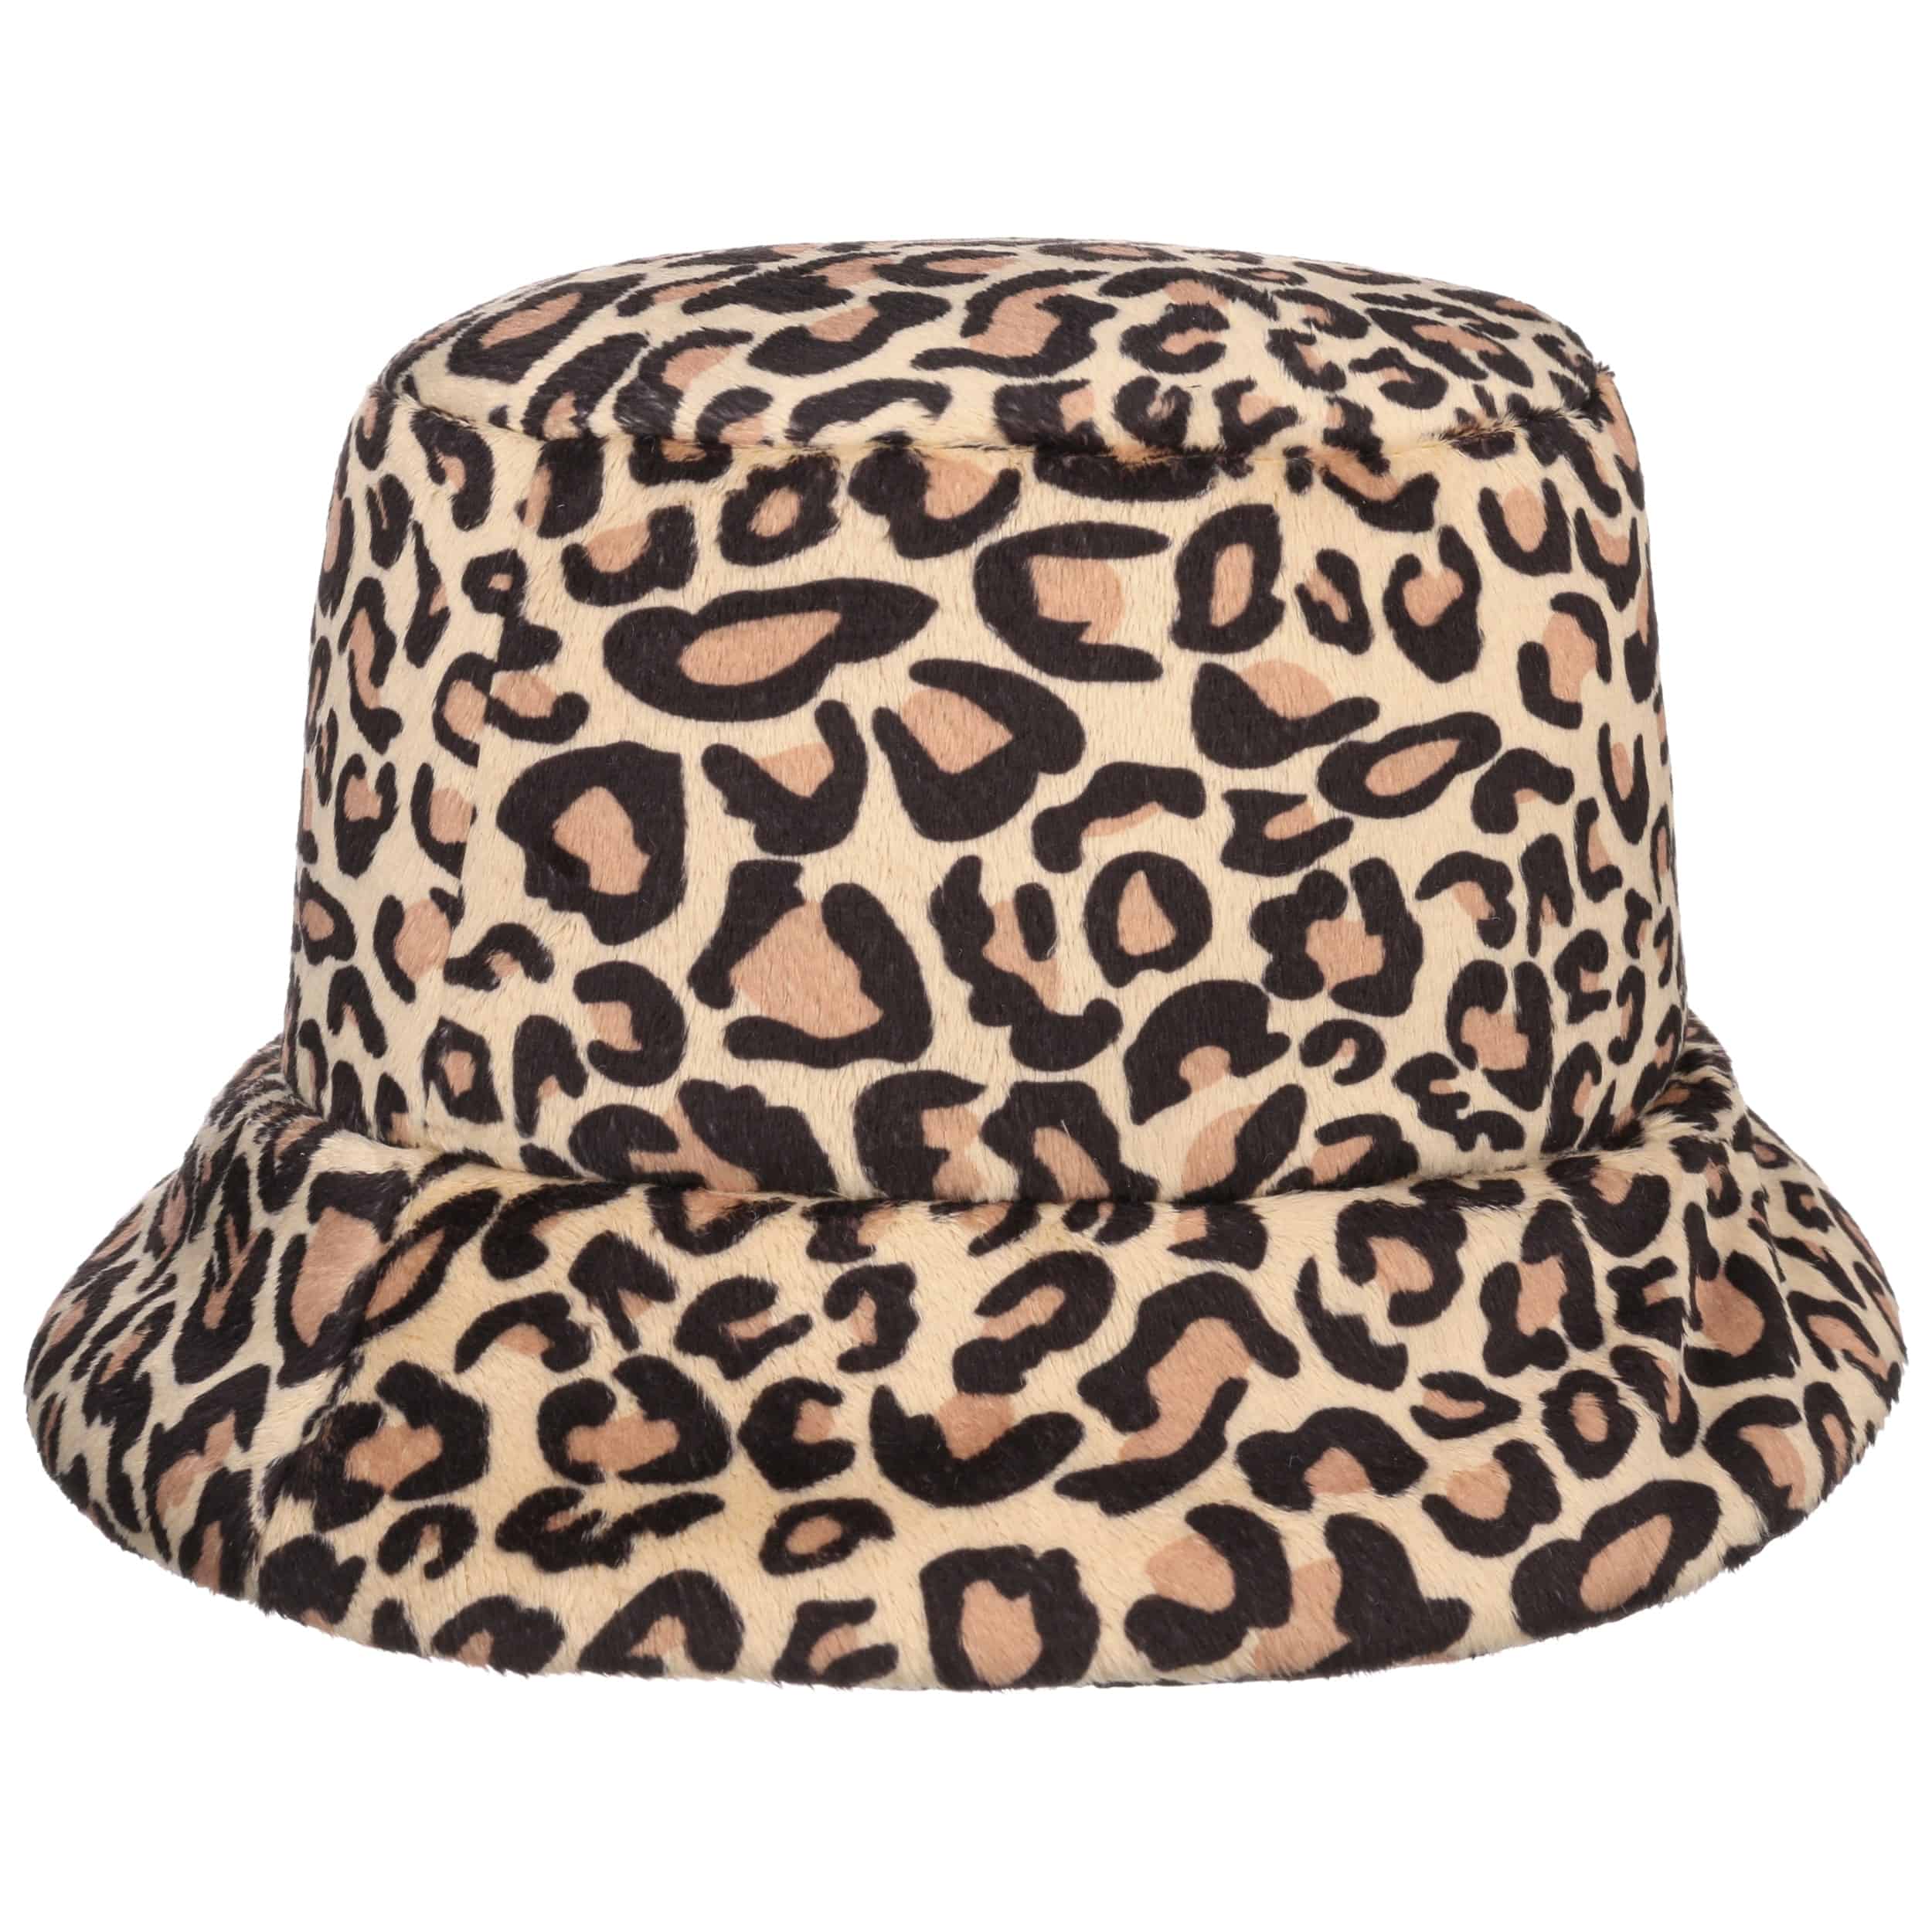 Reversible Hat with Leopard Print - 32,95